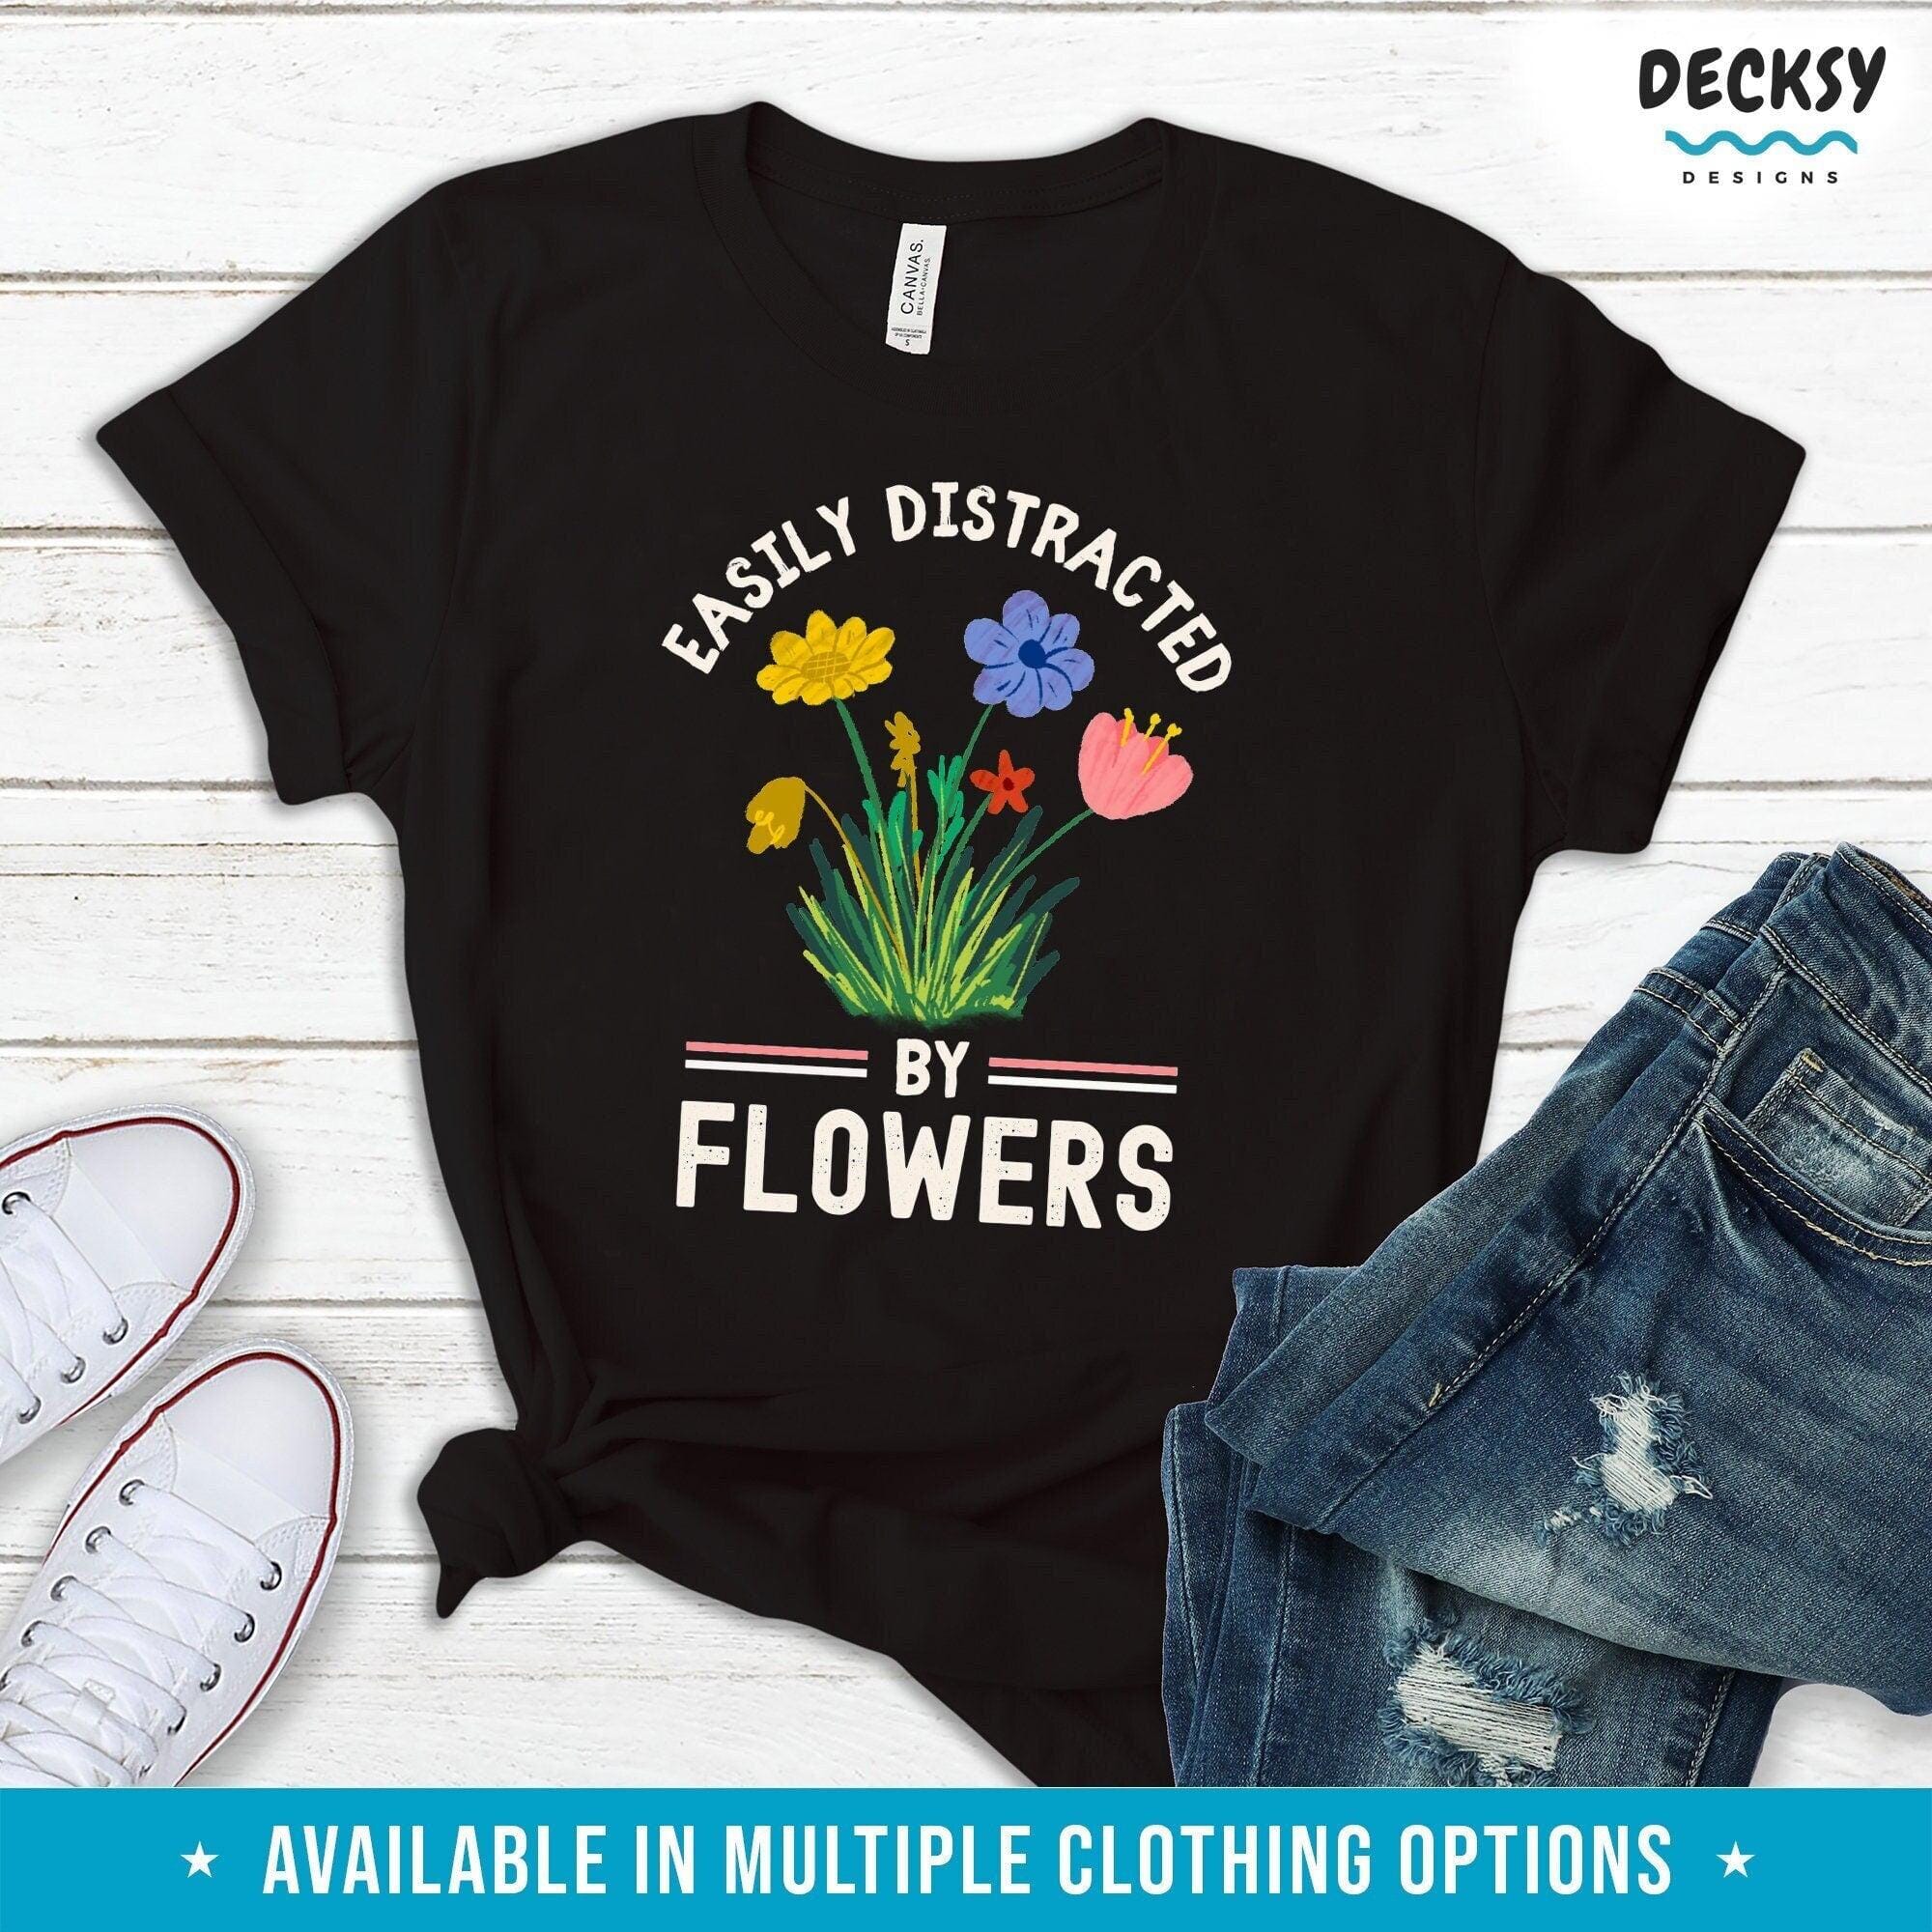 Flower Tshirt, Botanical Wildflowers Gift-Clothing:Gender-Neutral Adult Clothing:Tops & Tees:T-shirts:Graphic Tees-DecksyDesigns